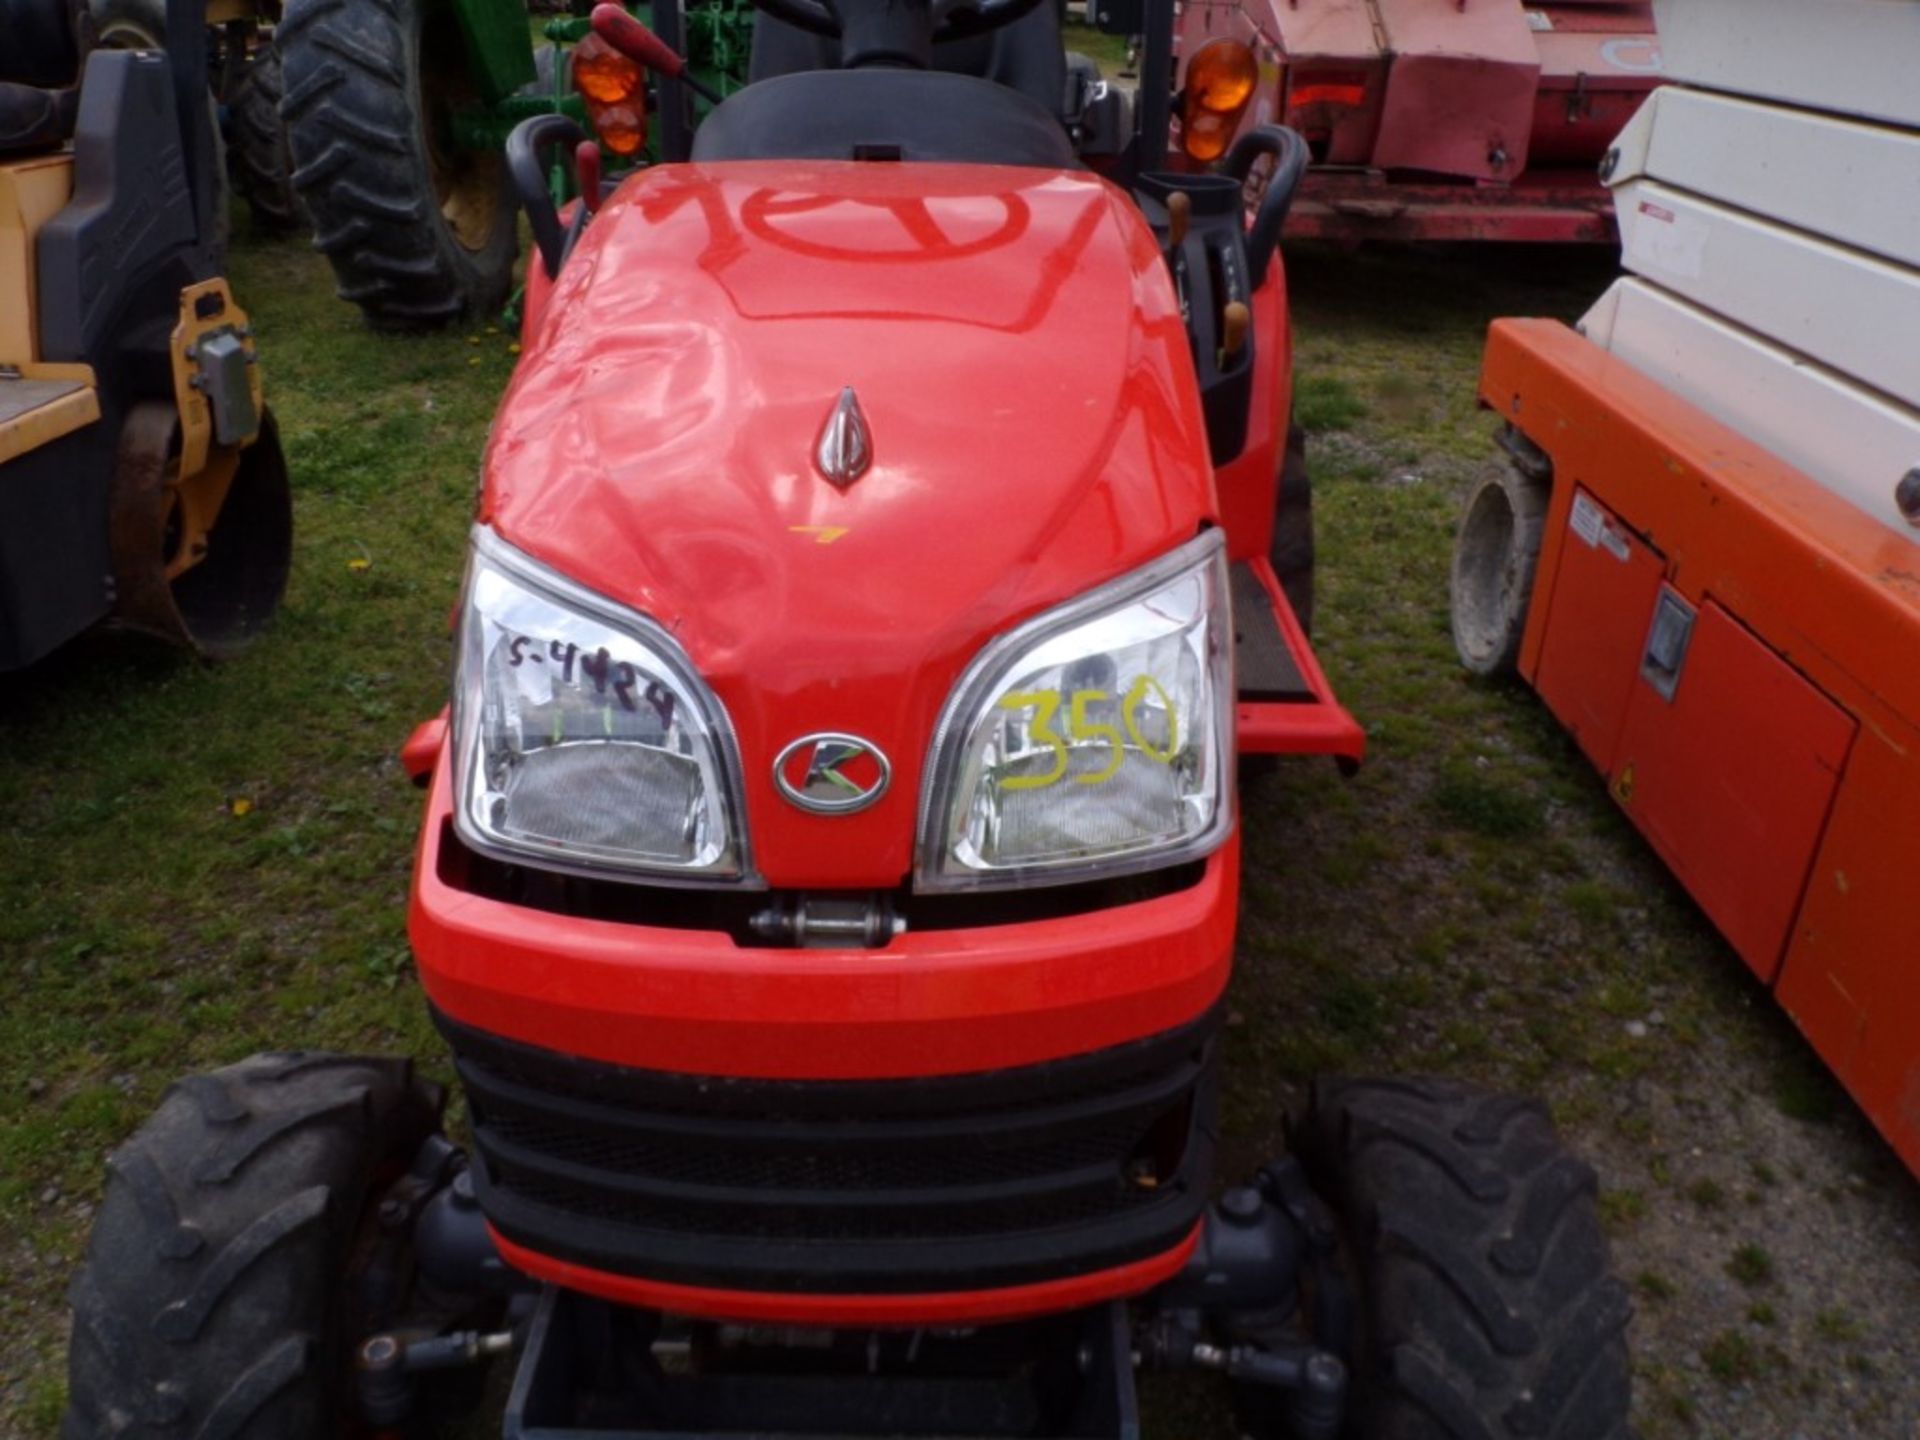 Kubota BX1870 4wd Sub Compact Tractor, Hydro, 400 Hrs., DENTED HOOD, 3pth, S/N 24593 (4424) - Image 2 of 4